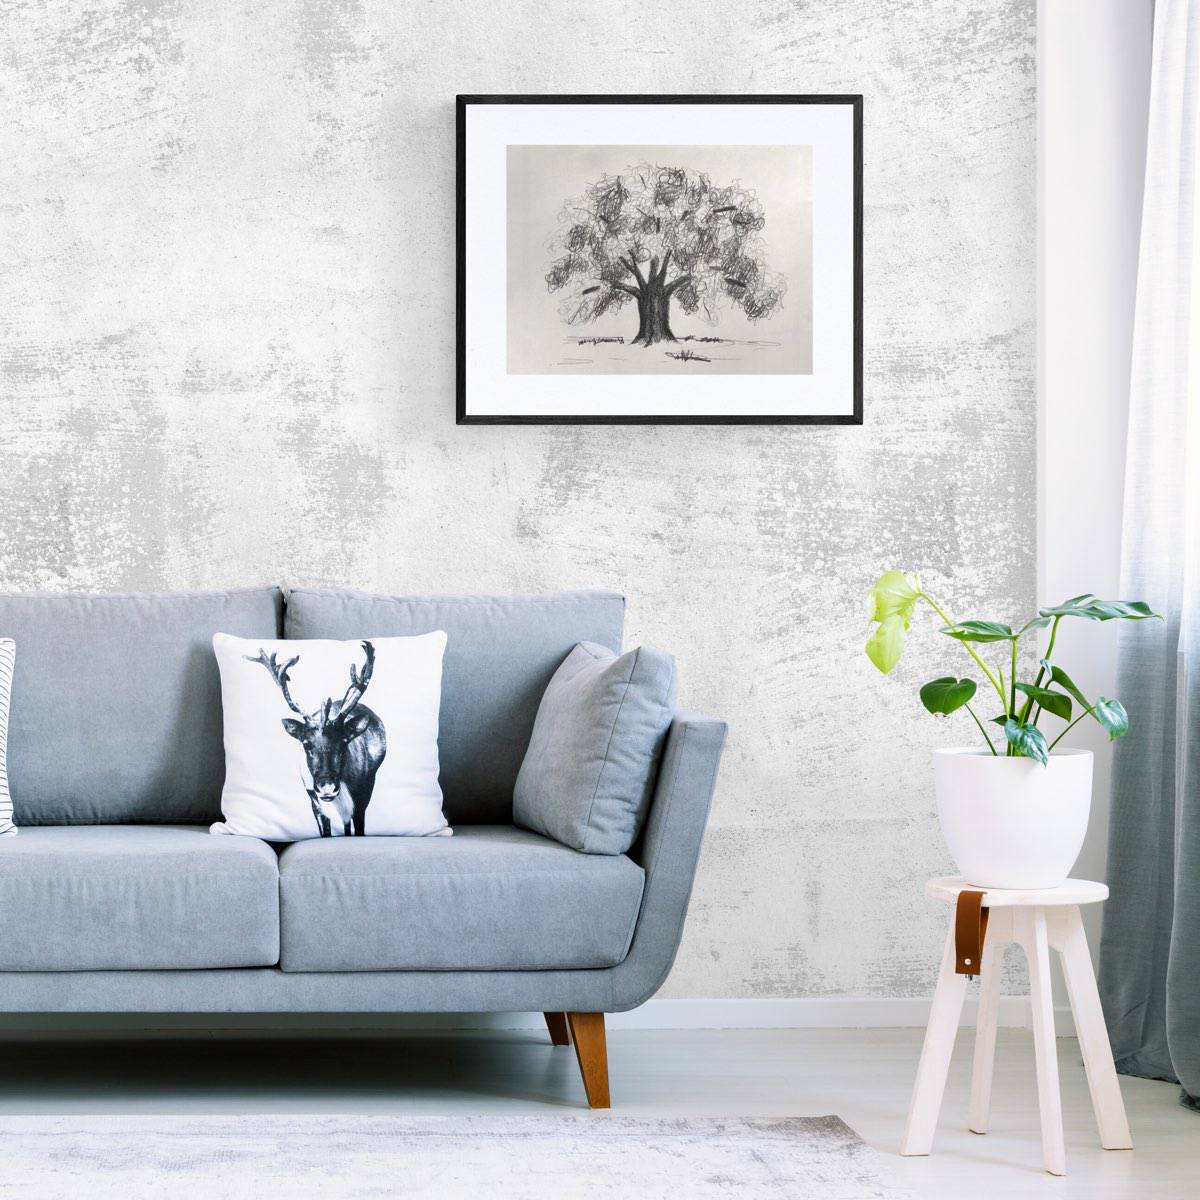 Drawing of an oak tree framed on the wall above a blue couch next to a plant.